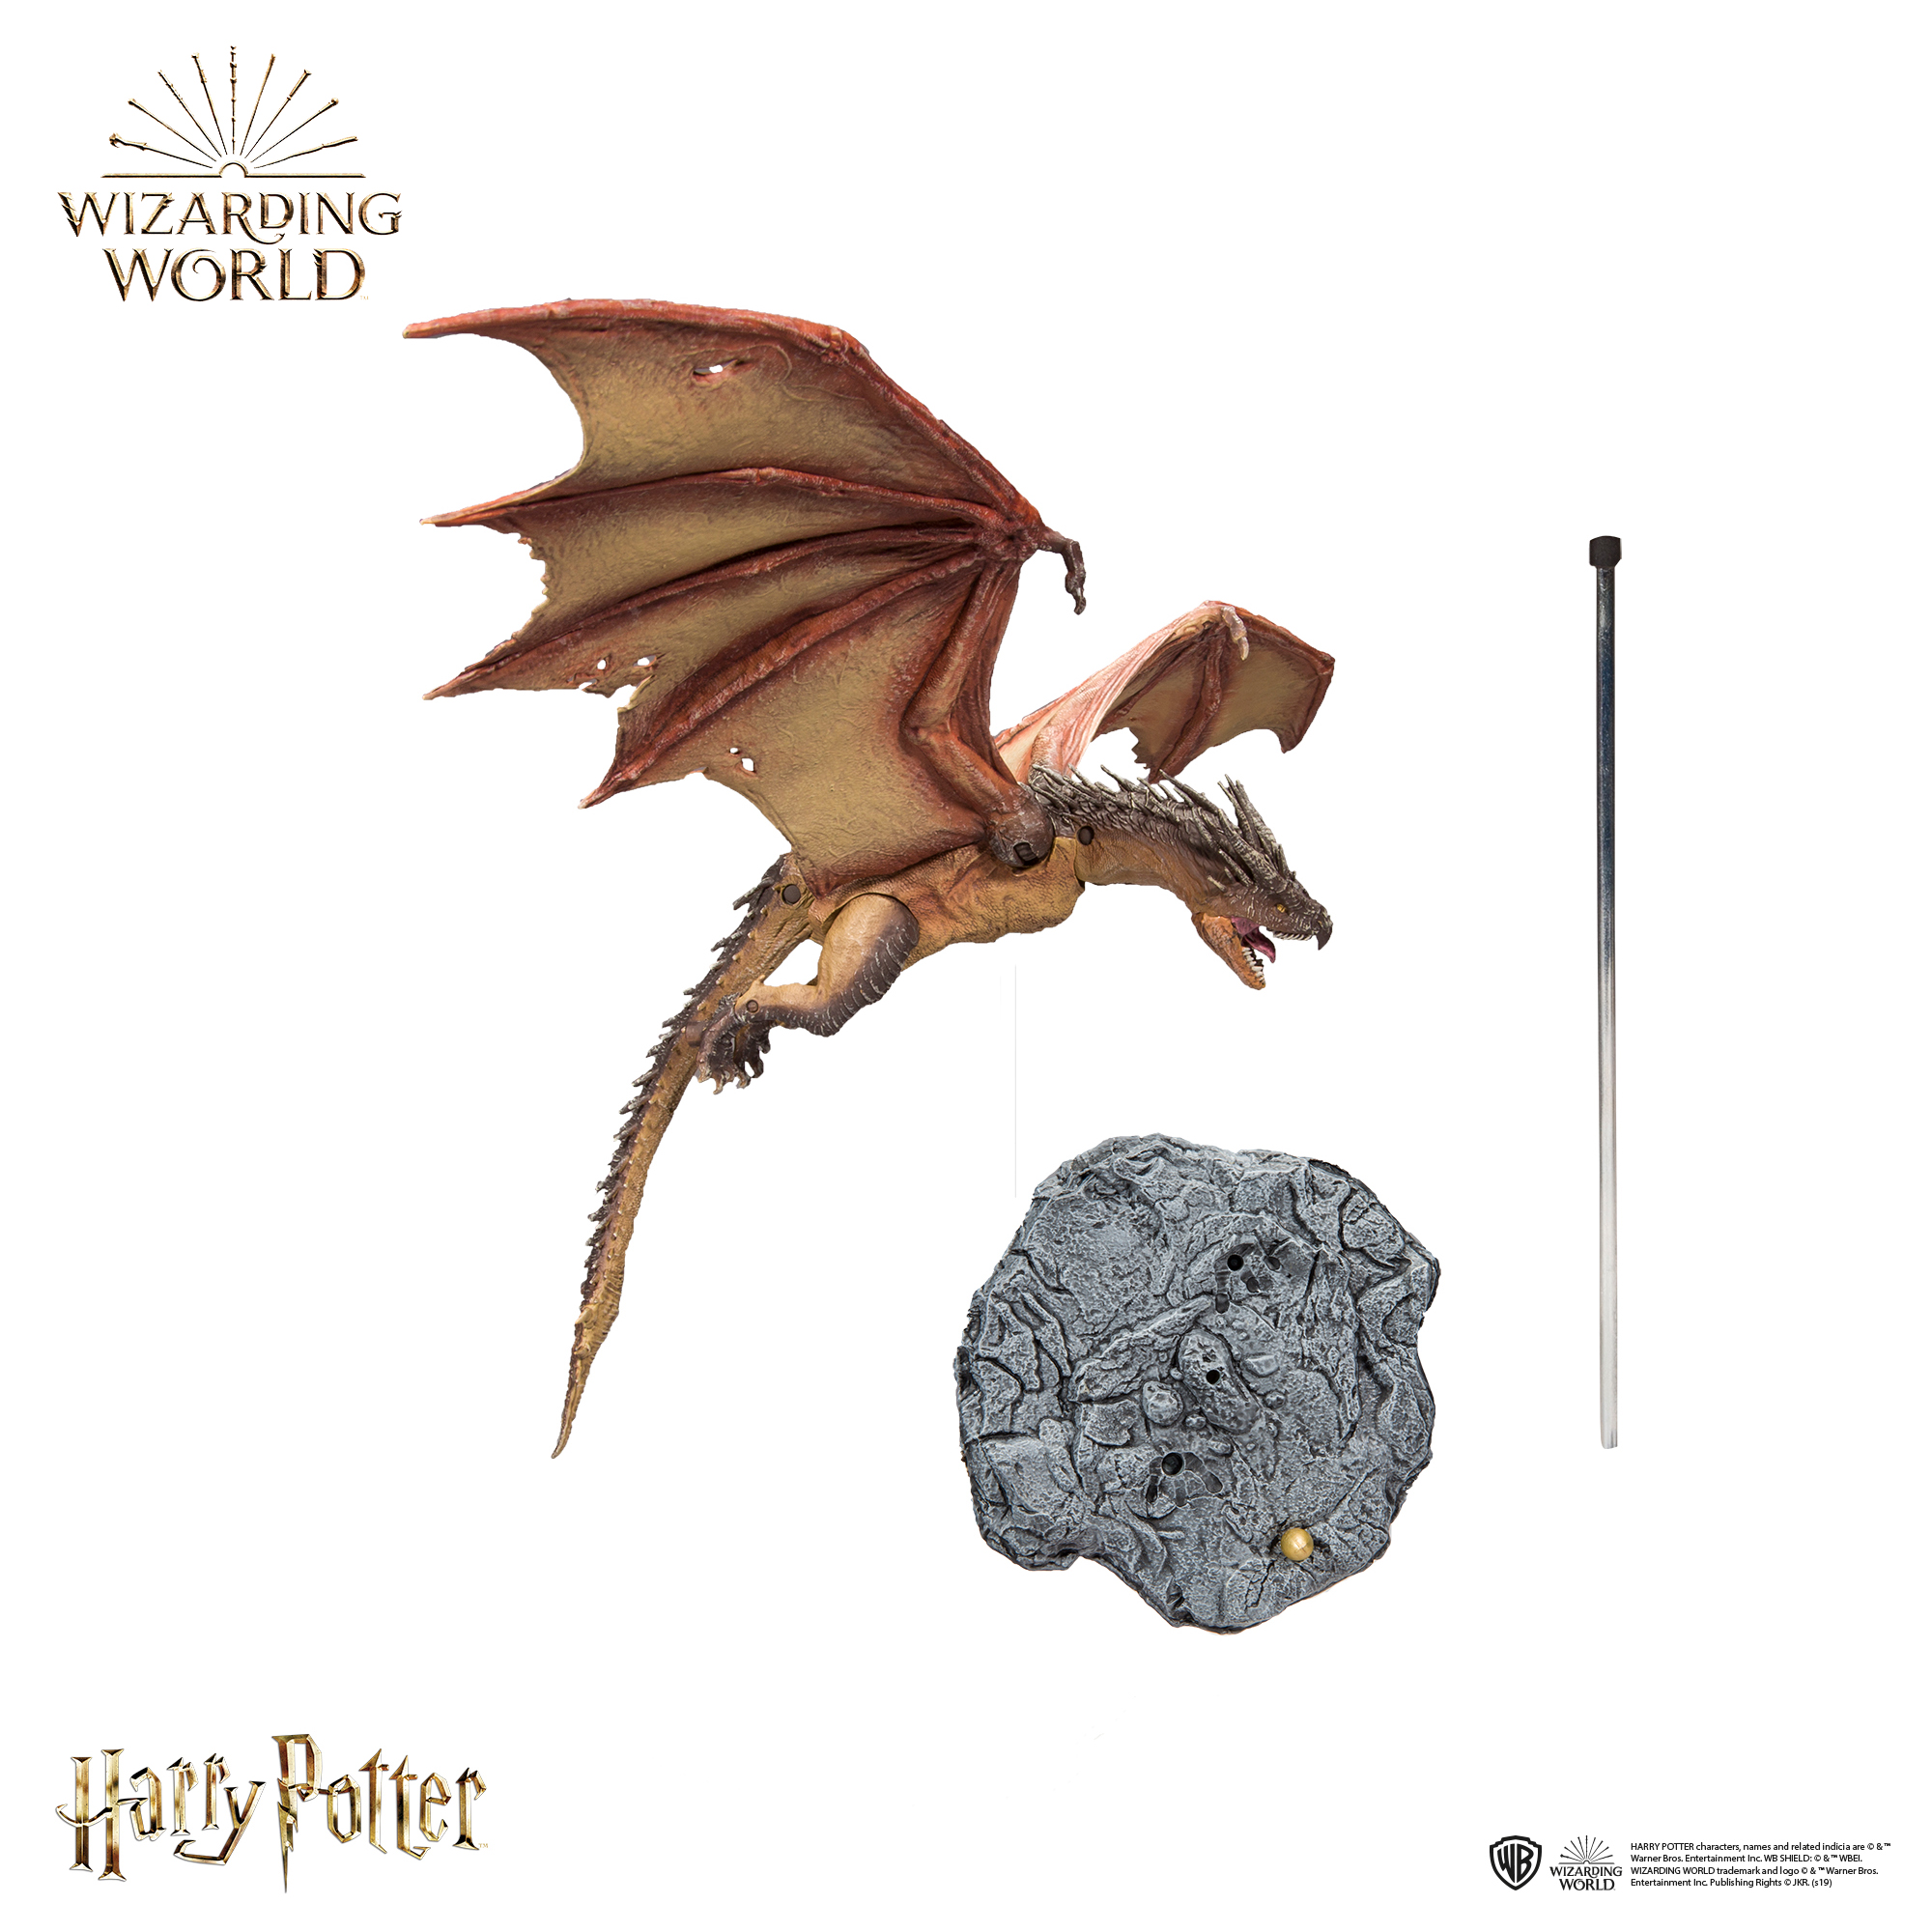 2019 McFarlane Toys Harry Potter Goblet of Fire Hungarian Horntail Figure for sale online